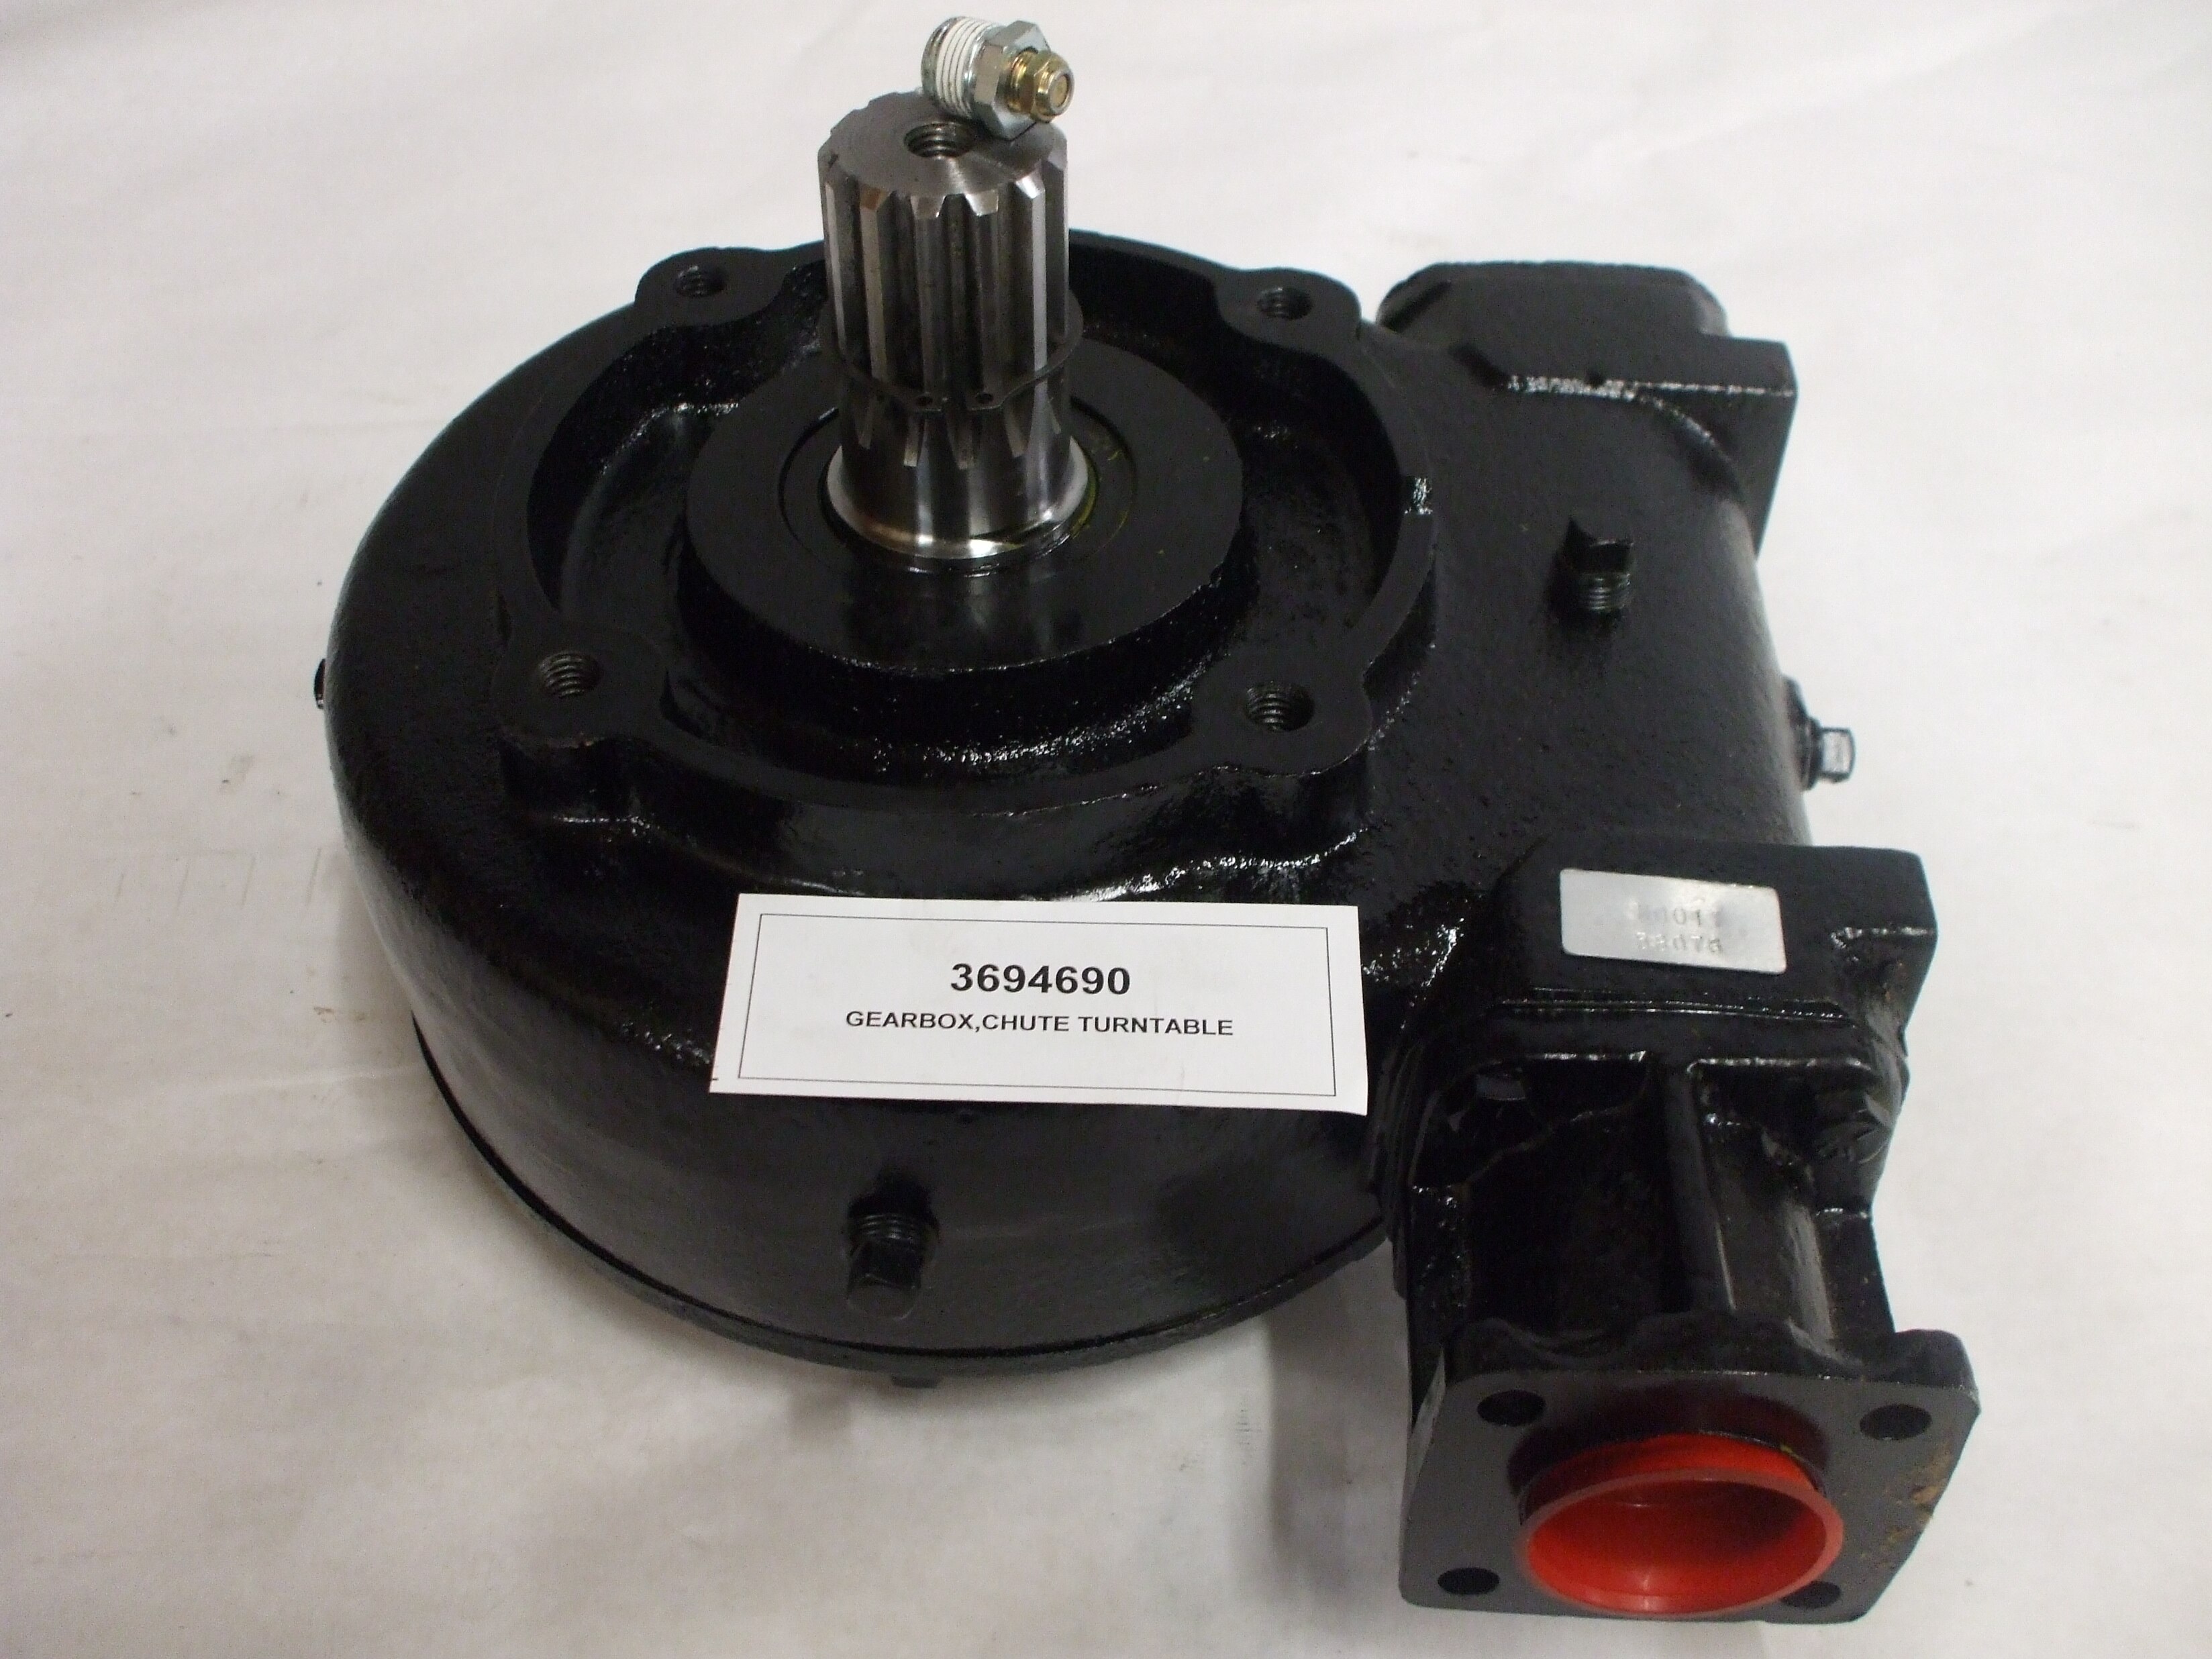 GEARBOX,CHUTE TURNTABLE